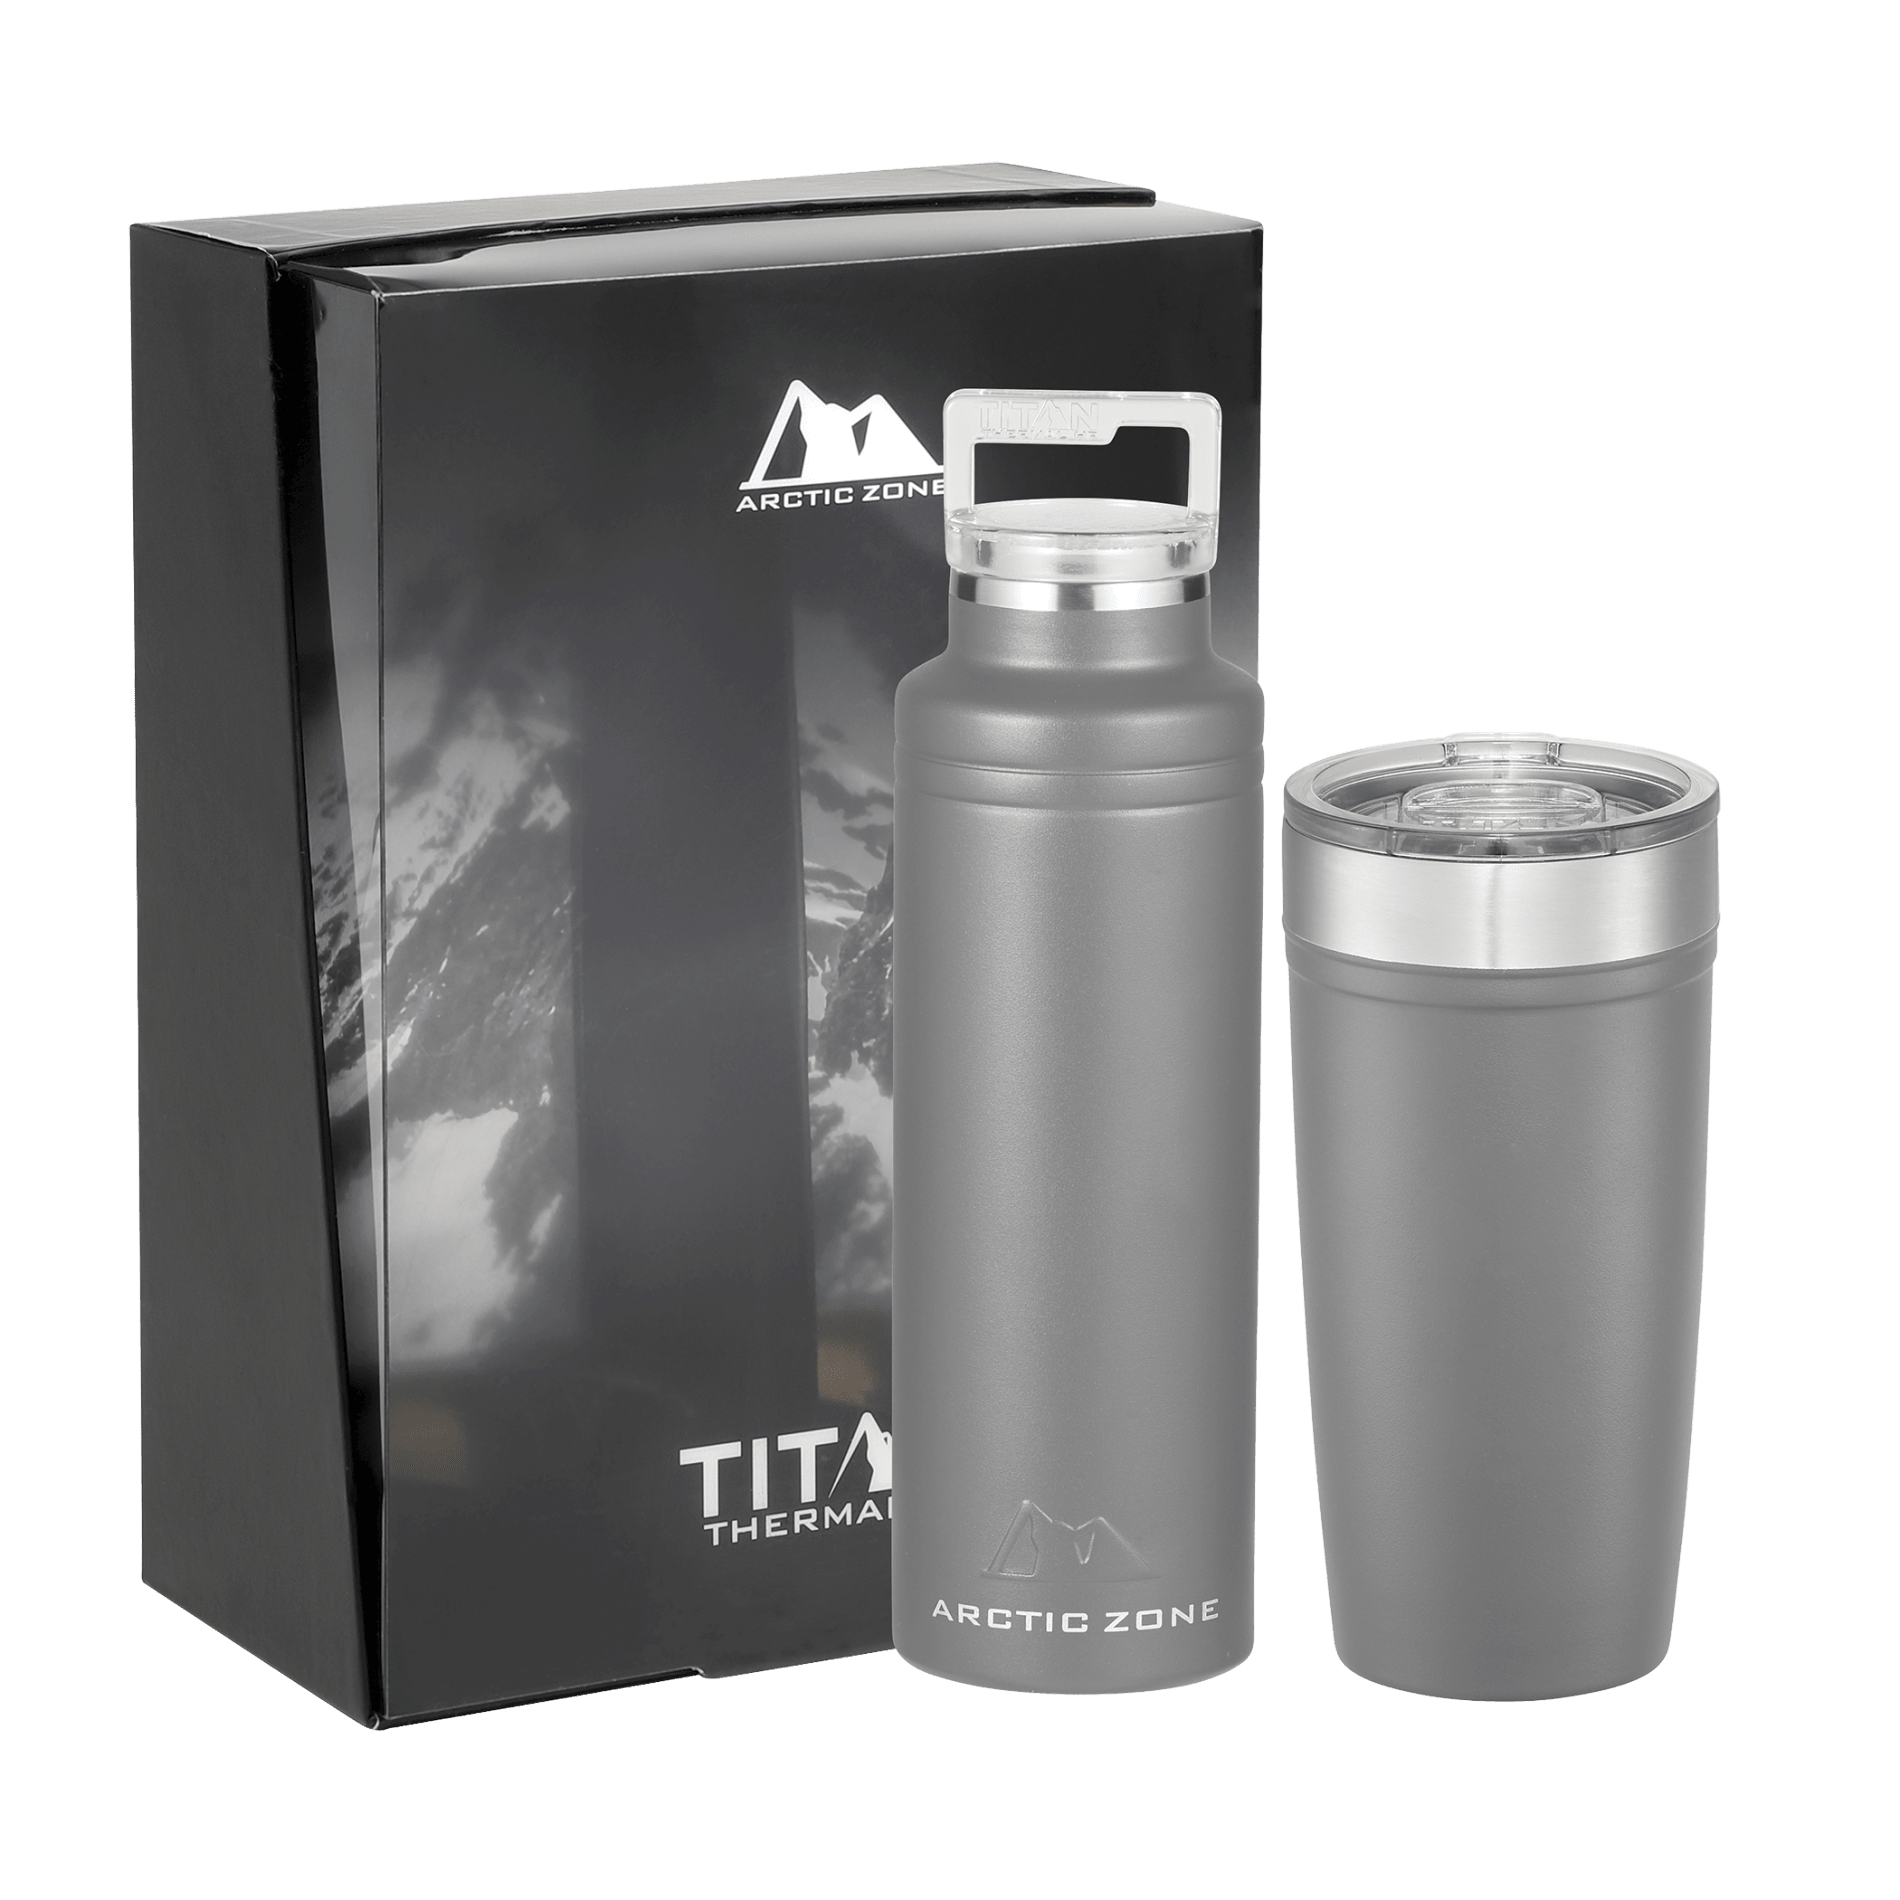 https://www.nyfifth.com/category/9999/arctic-zone-1626-26-titan-thermal-hp-copper-vac-gift-set_ALES-1999-1626-26_NyFifth.jpg